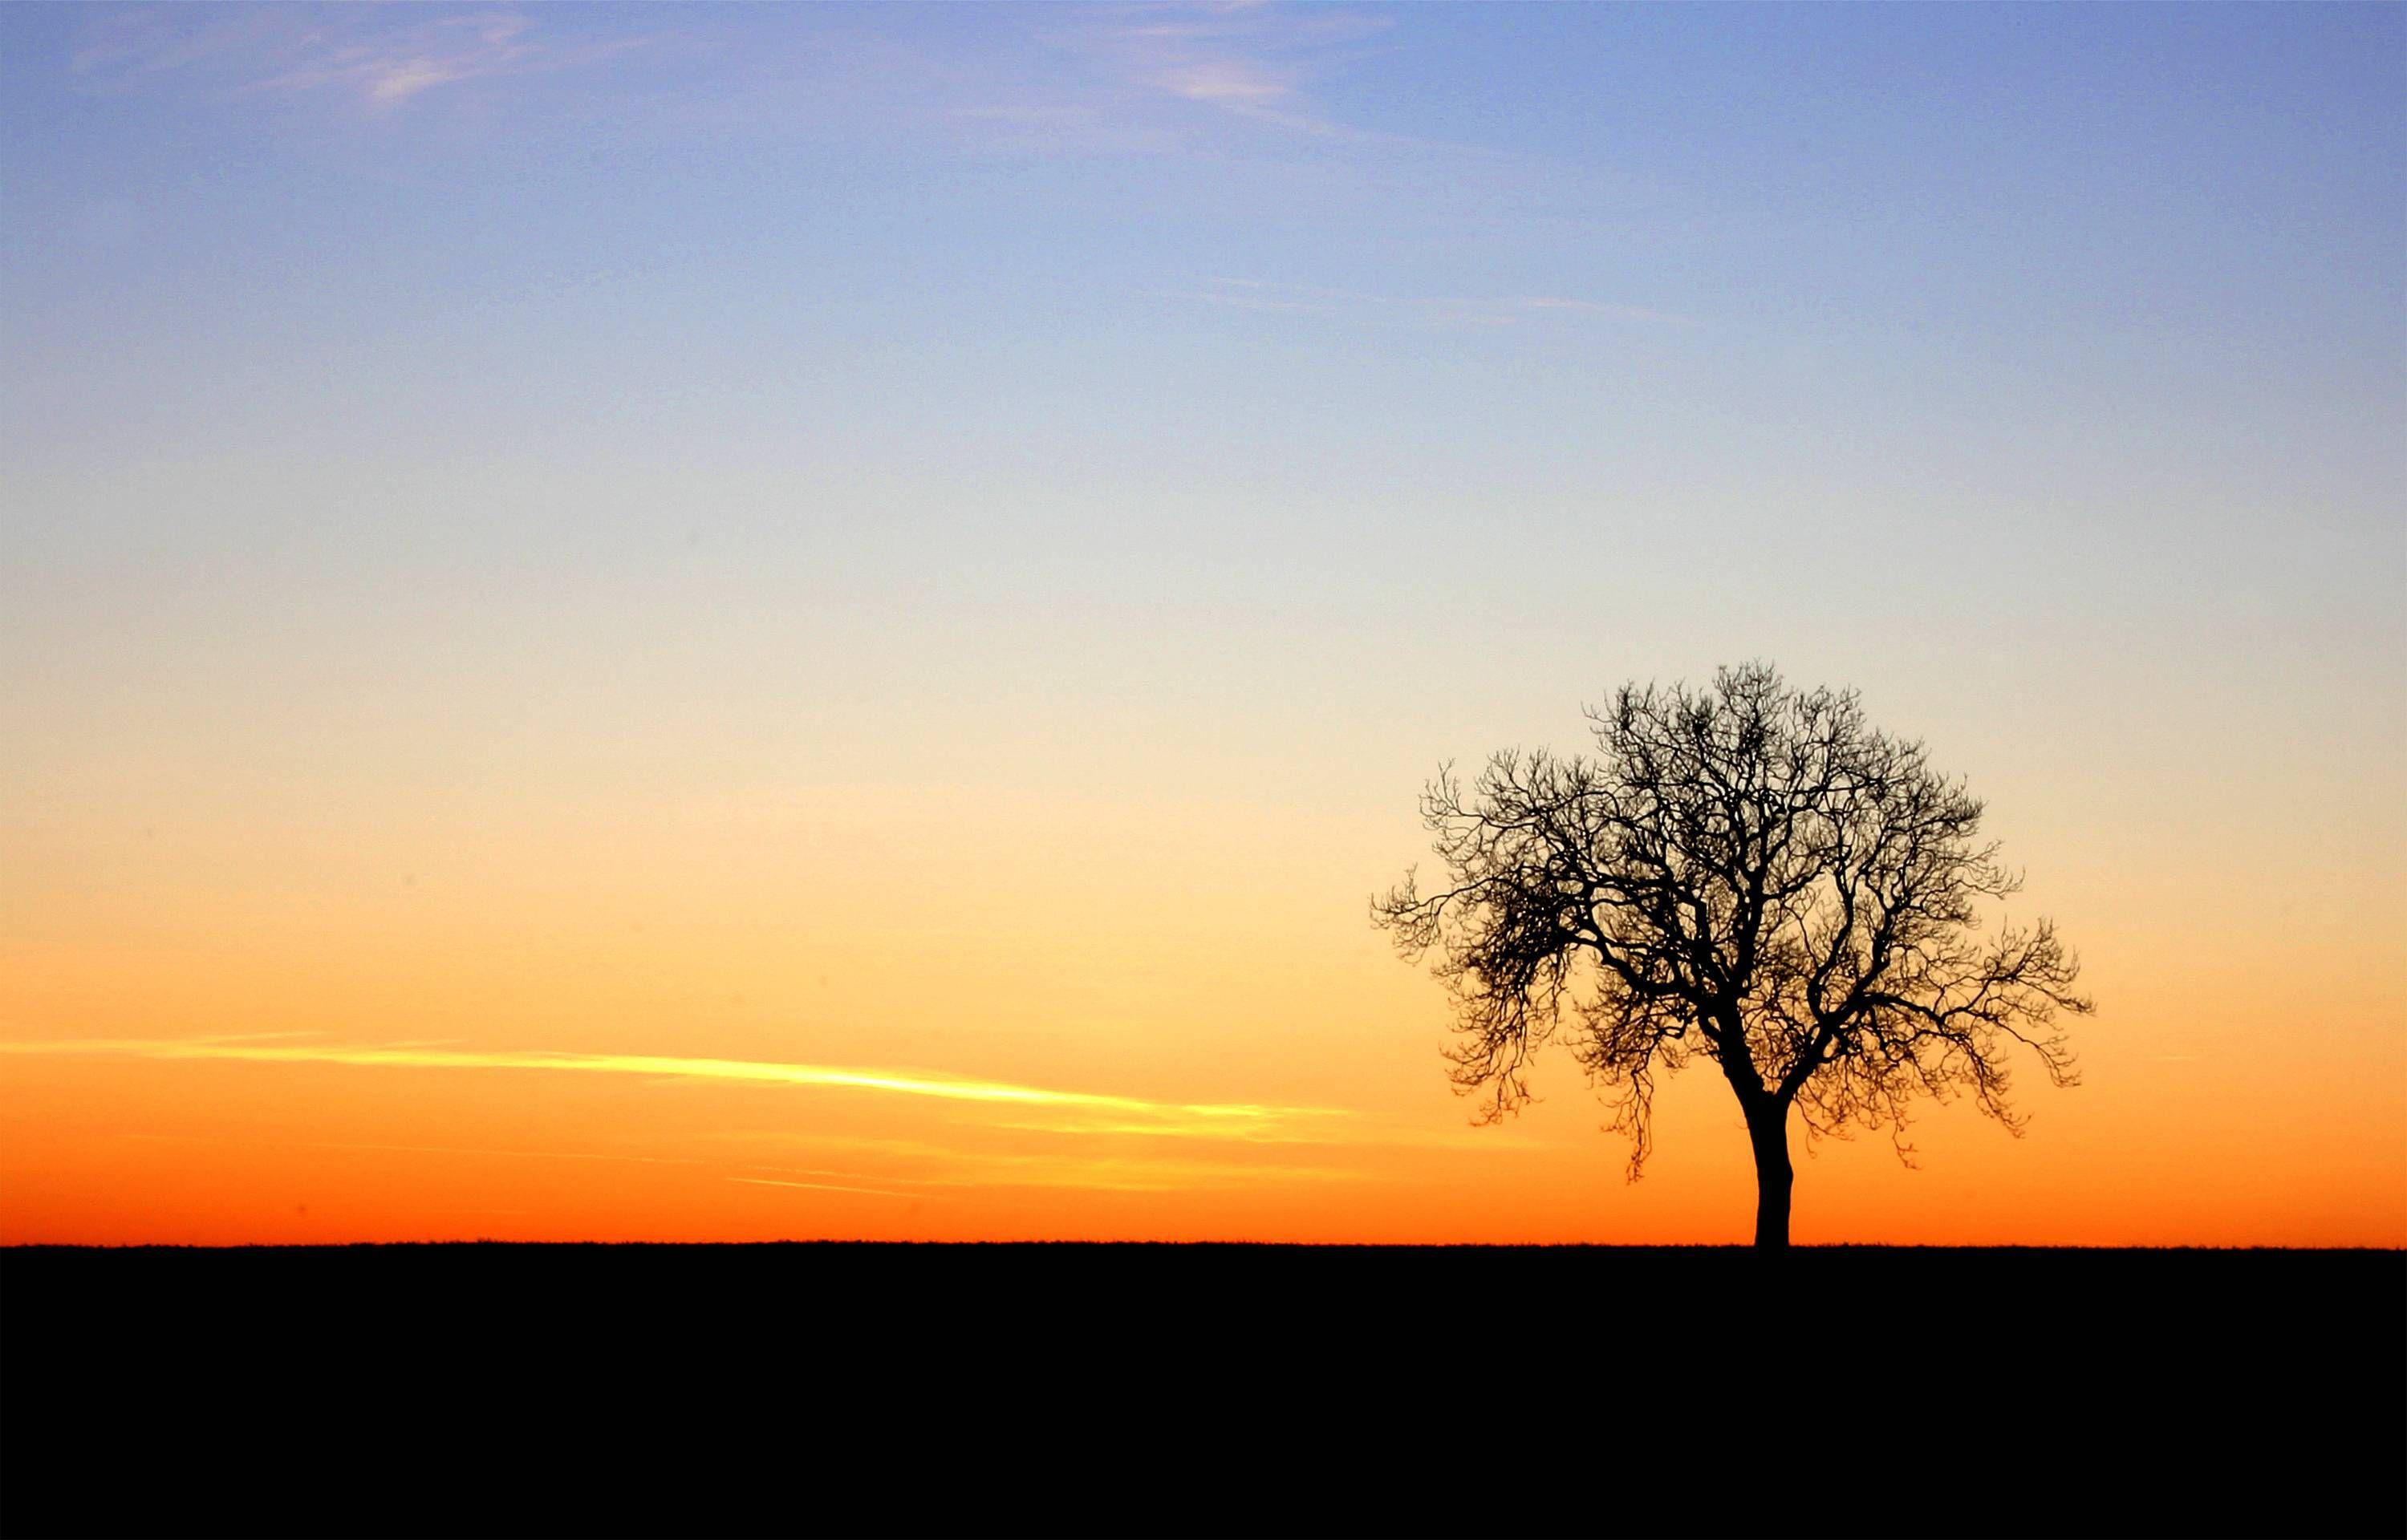 sunset tree. Ideas for paintings to teach. Tree silhouette tattoo